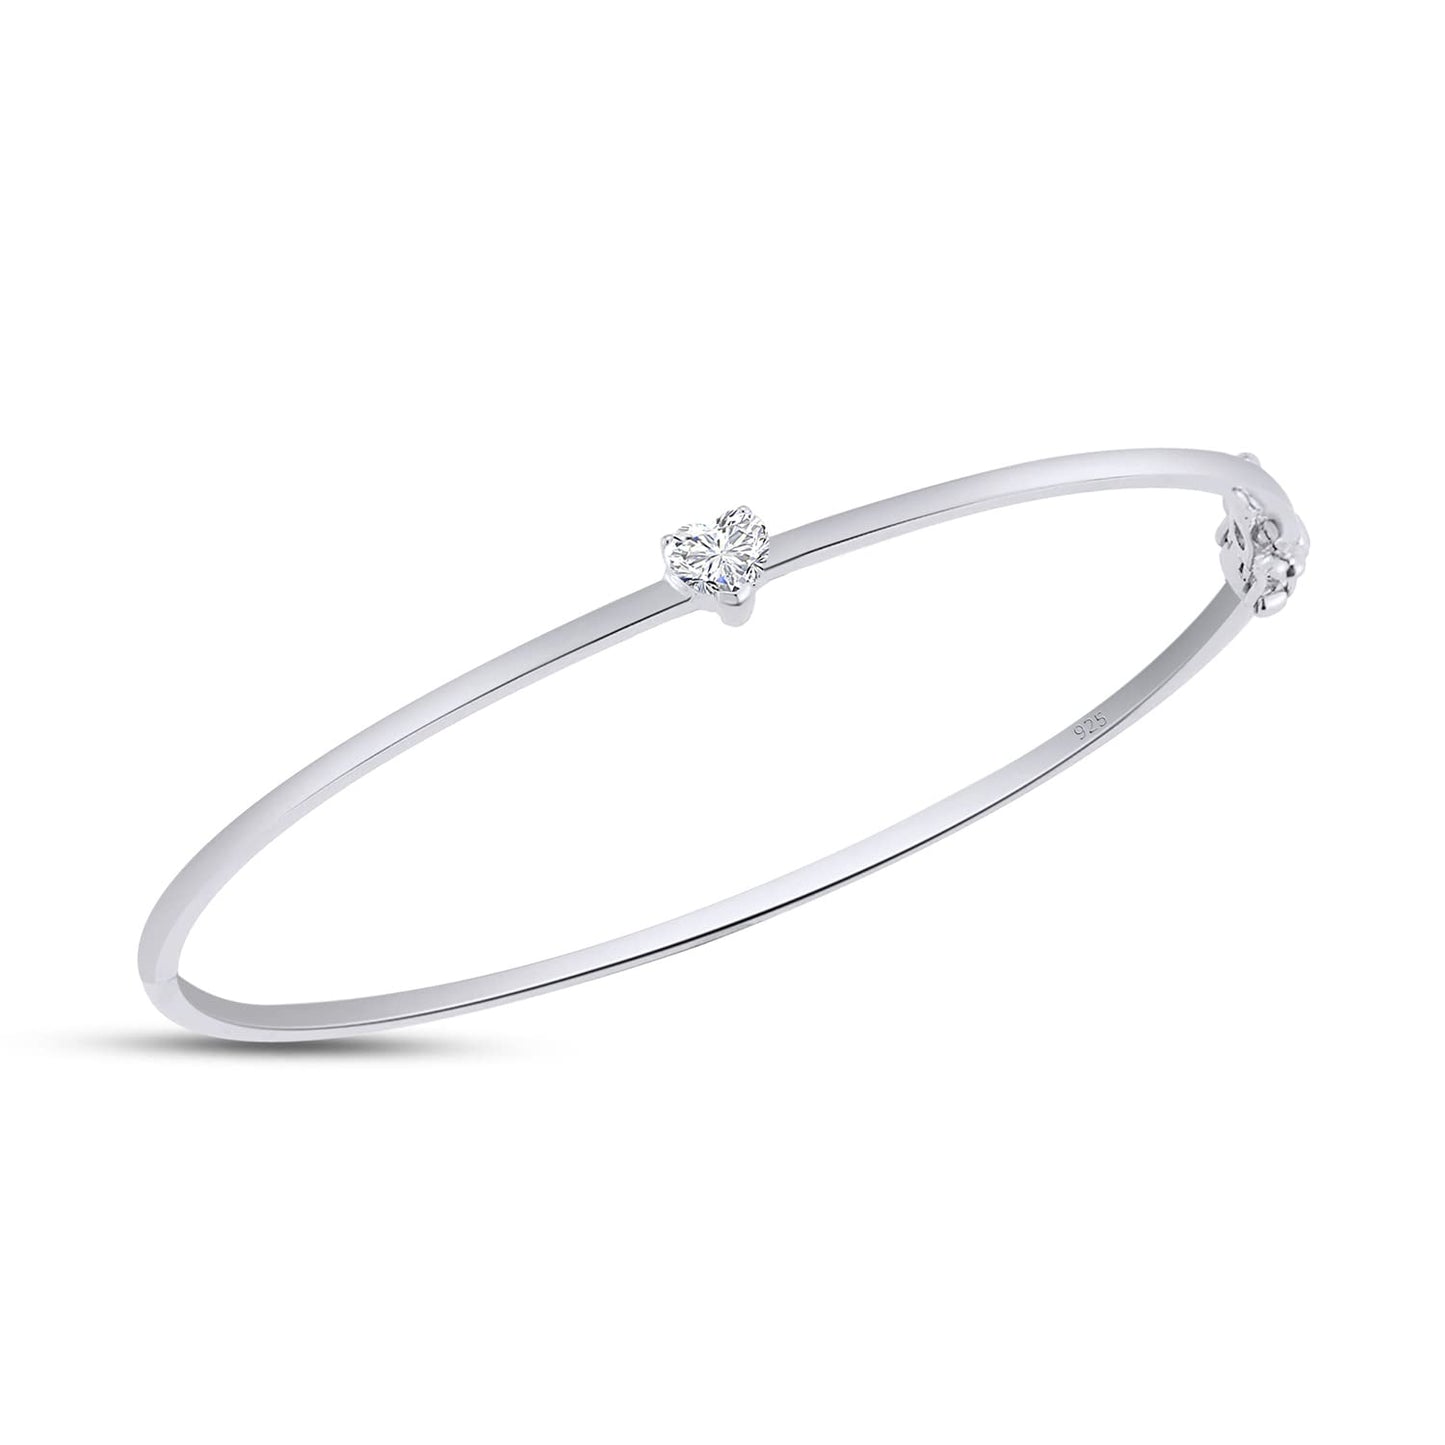 Load image into Gallery viewer, Heart Shape White Cubic Zirconia Solitaire Bangle Bracelet For Women In 925 Sterling Silver
